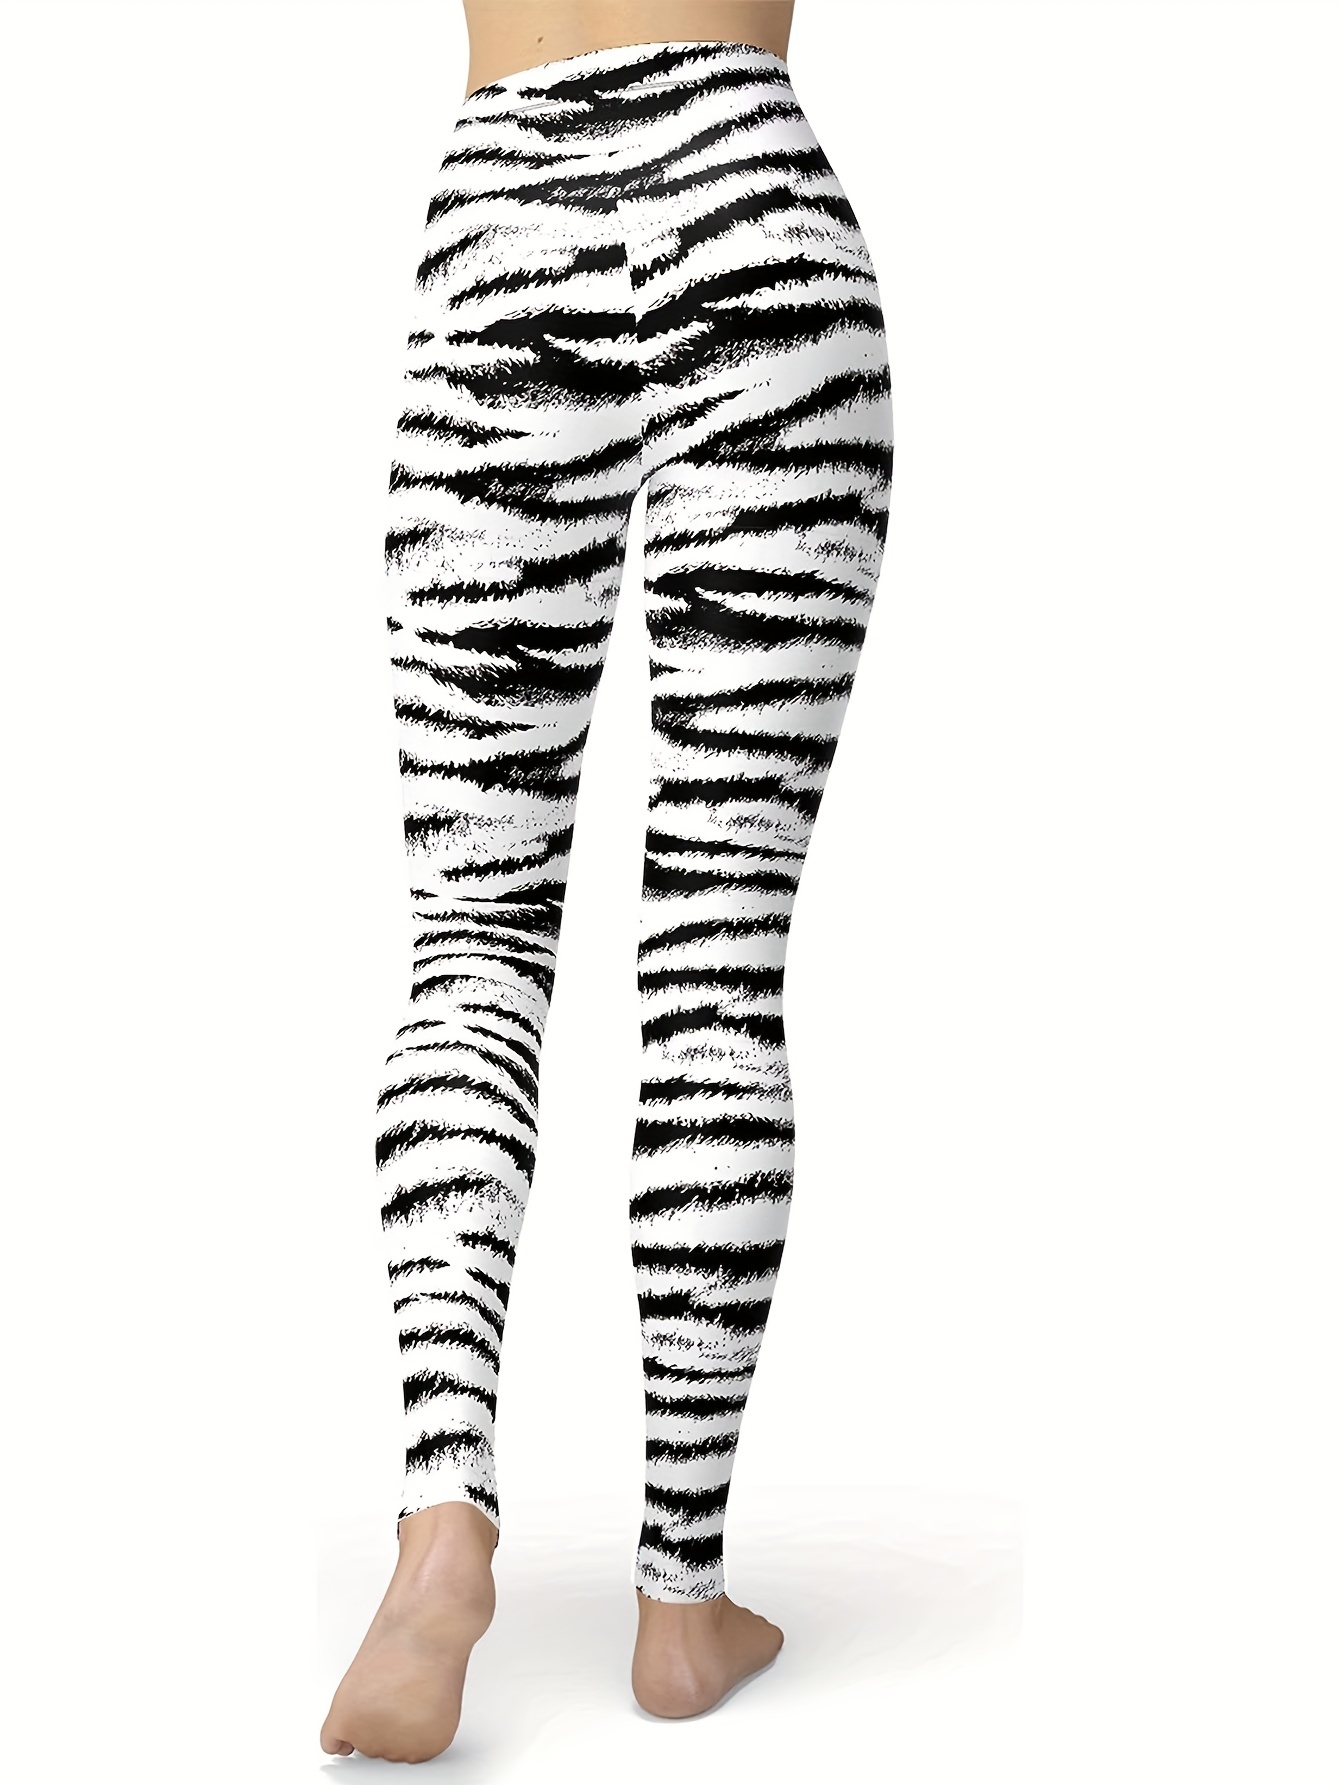 Cow Print Leggings, Black and White, Cow Tights, High-waisted